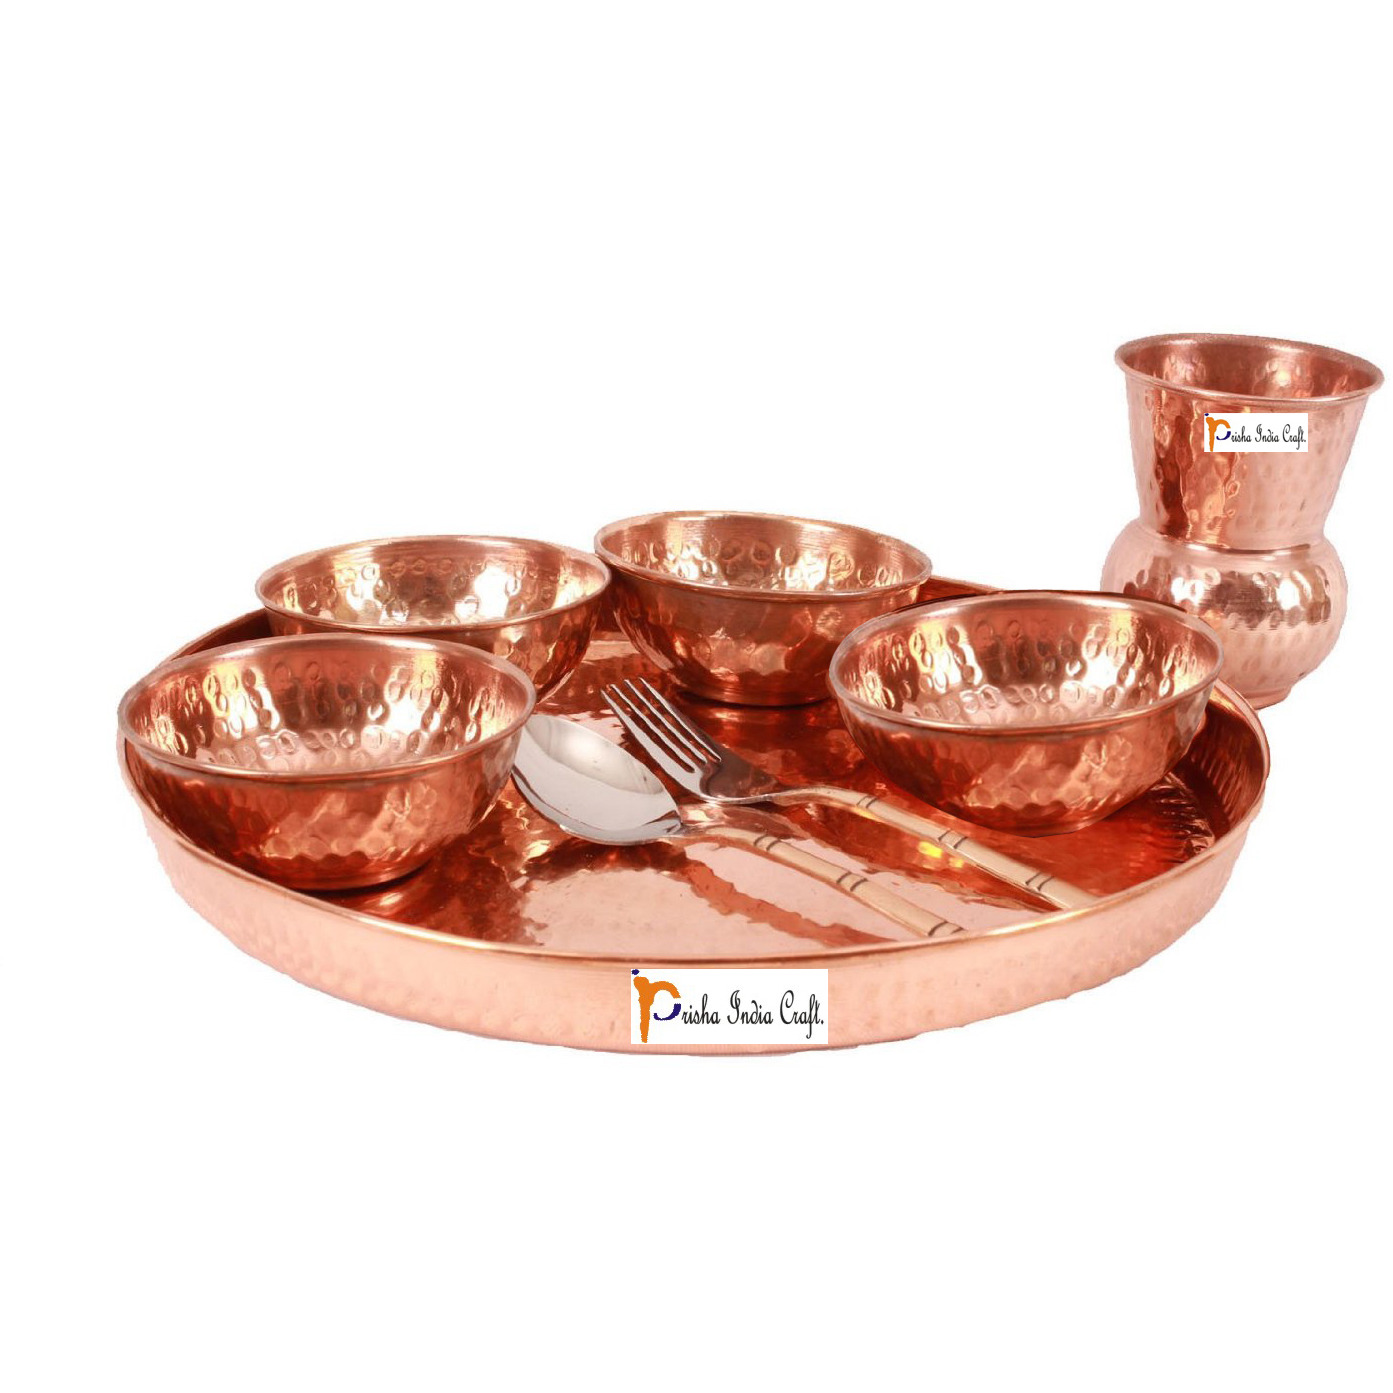 Prisha India Craft B. Set of 5 Dinnerware Traditional 100% Pure Copper Dinner Set of Thali Plate, Bowls, Glass and Spoon, Dia 12  With 1 Pure Copper Hammered Pitcher Jug - Christmas Gift